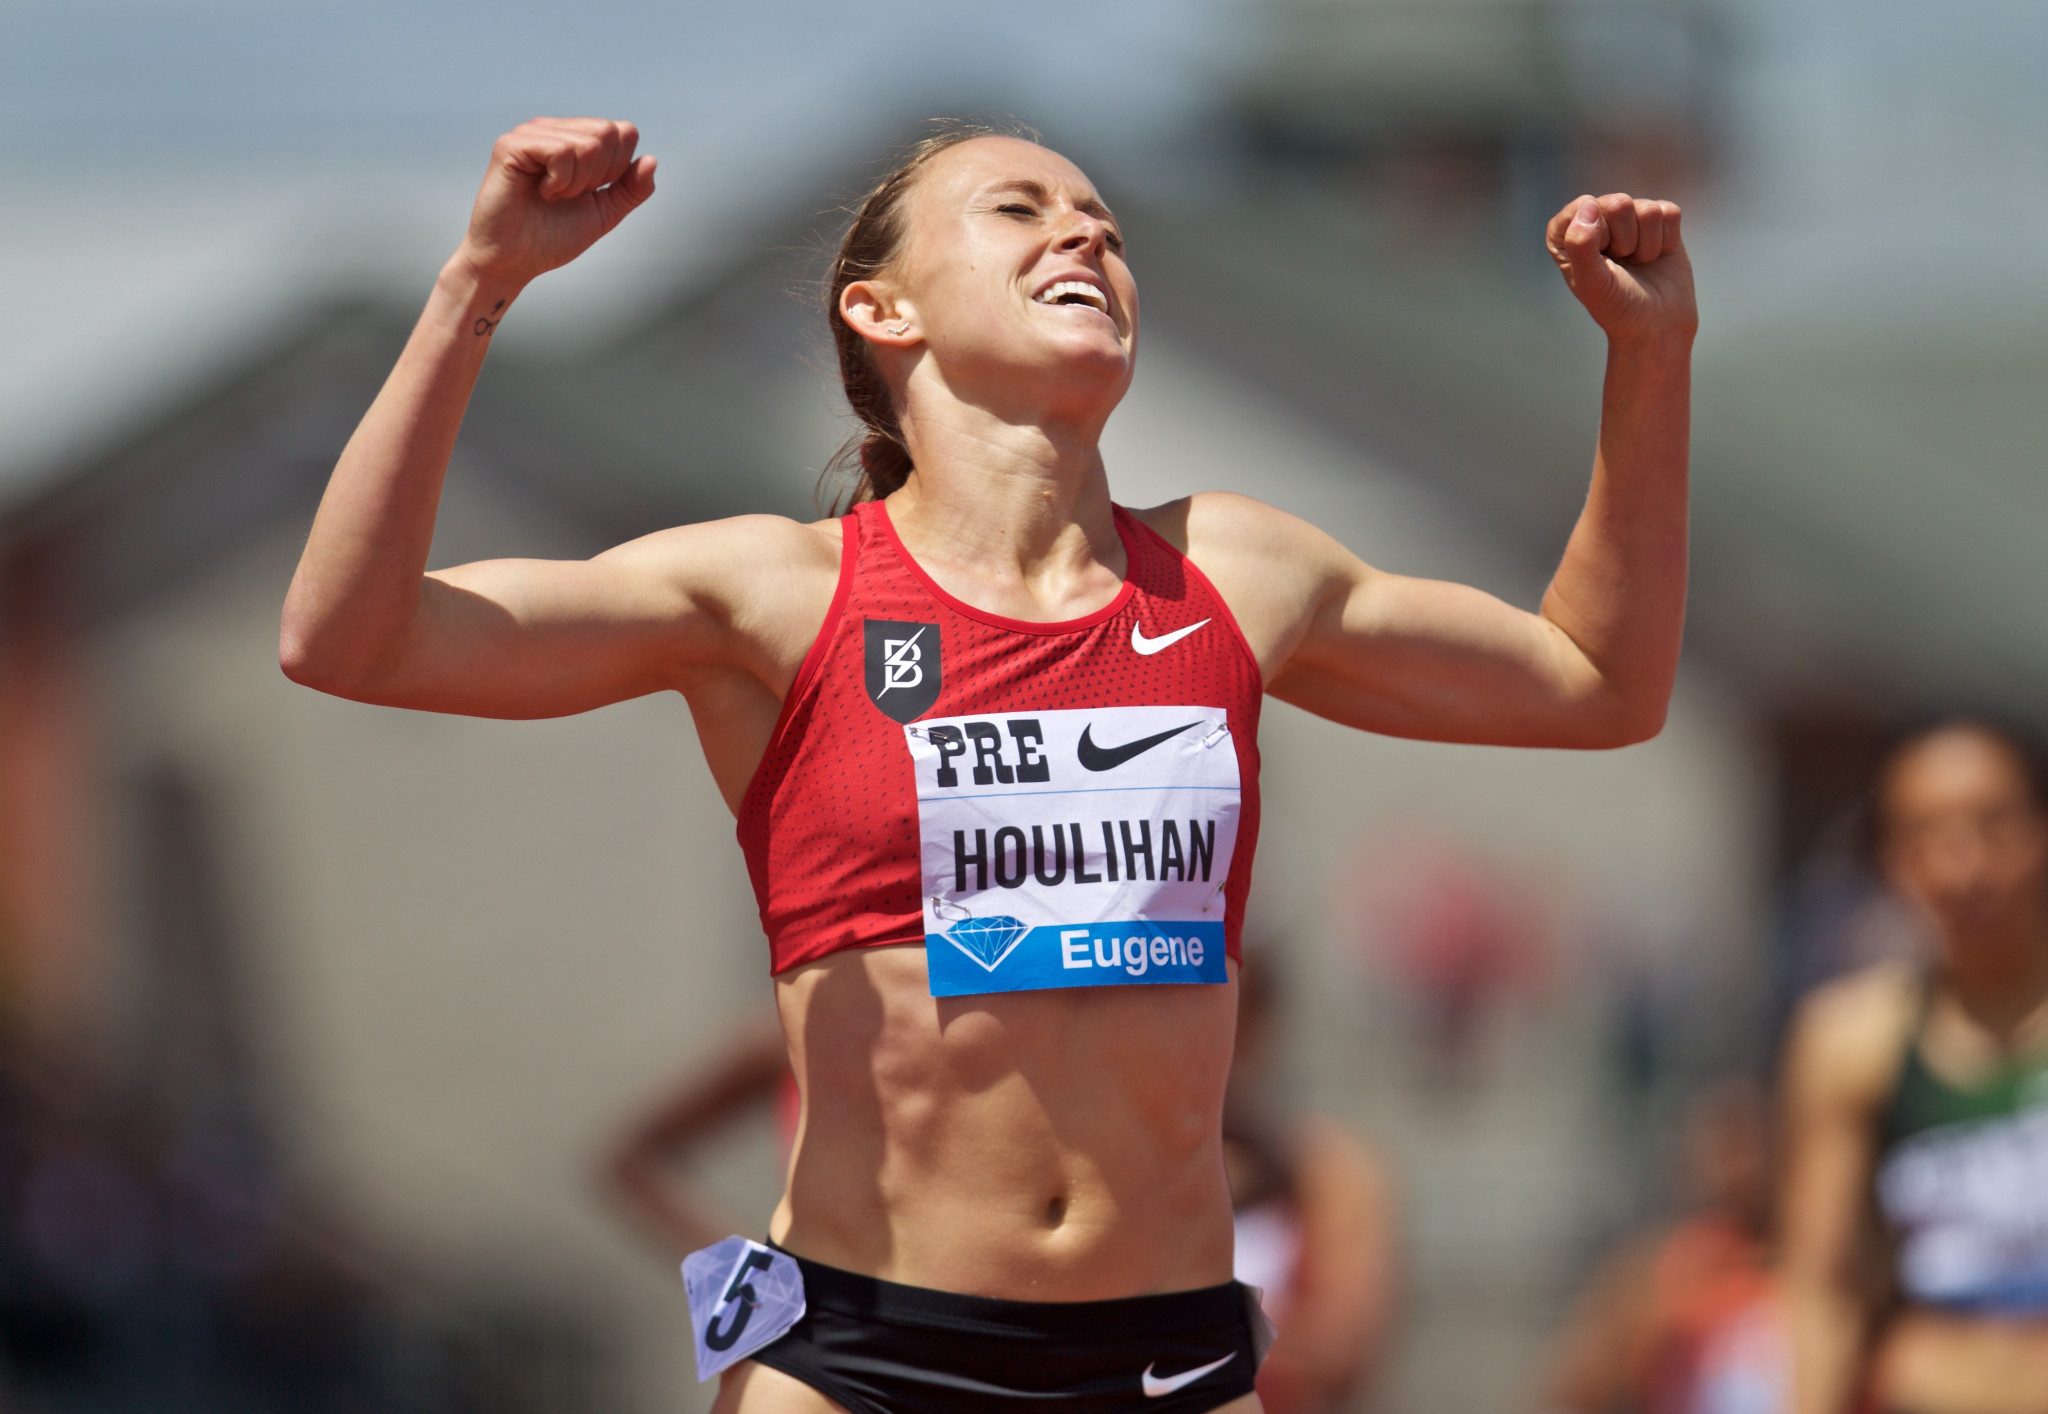 Shelby Houlihan's involvement at BTC has been controversial in the athletics community ©Getty Images